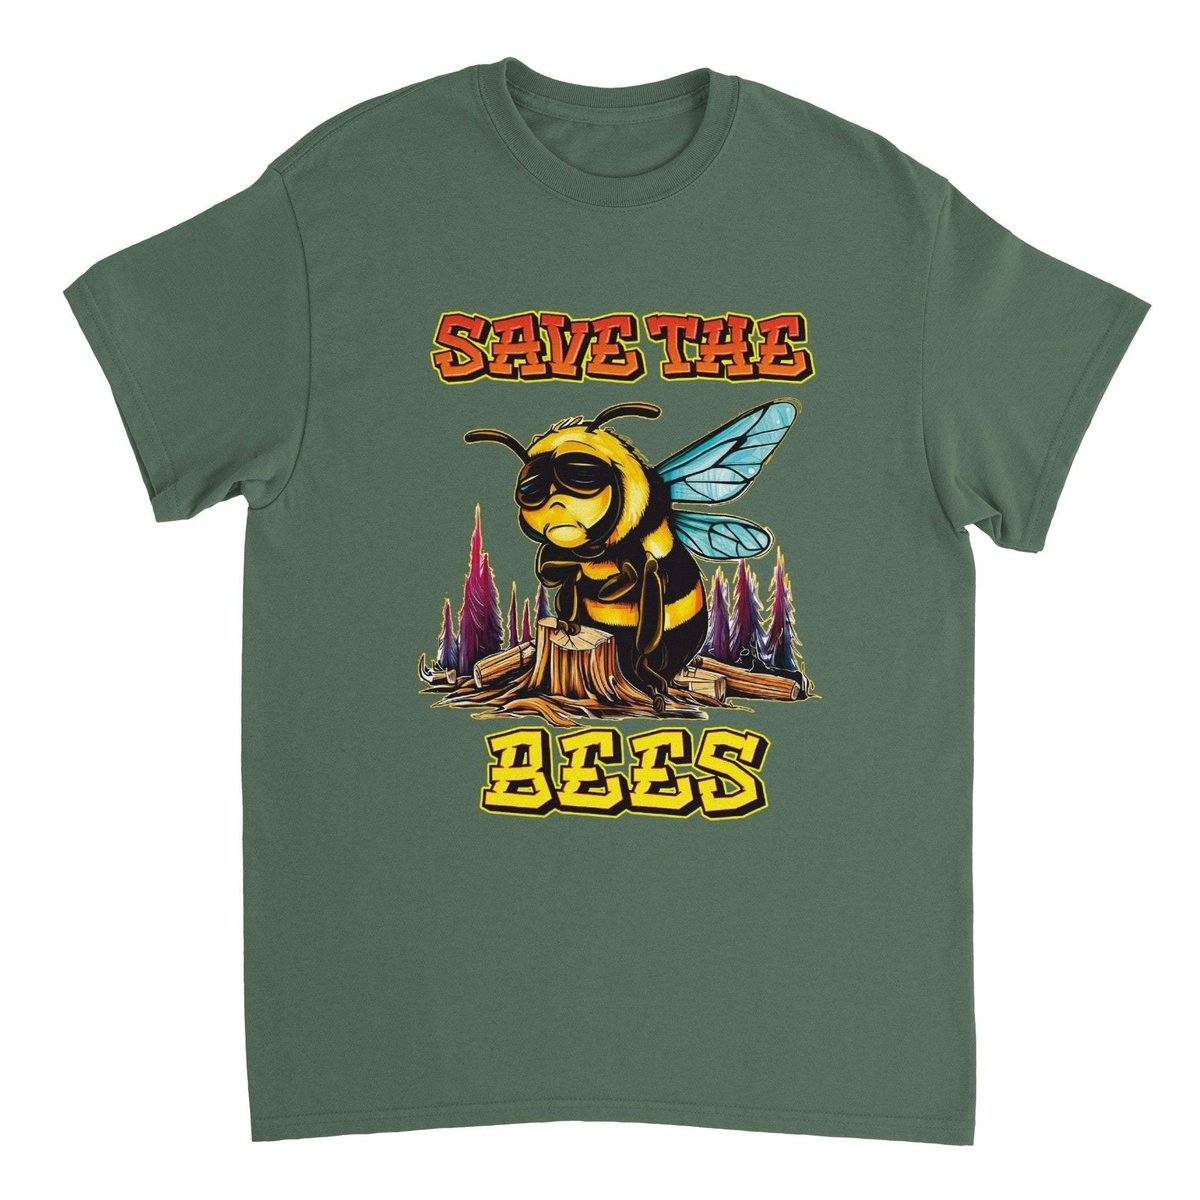 Save The Bees Tshirt - Crying Bee - Unisex Crewneck T-shirt Australia Online Color Military Green / S